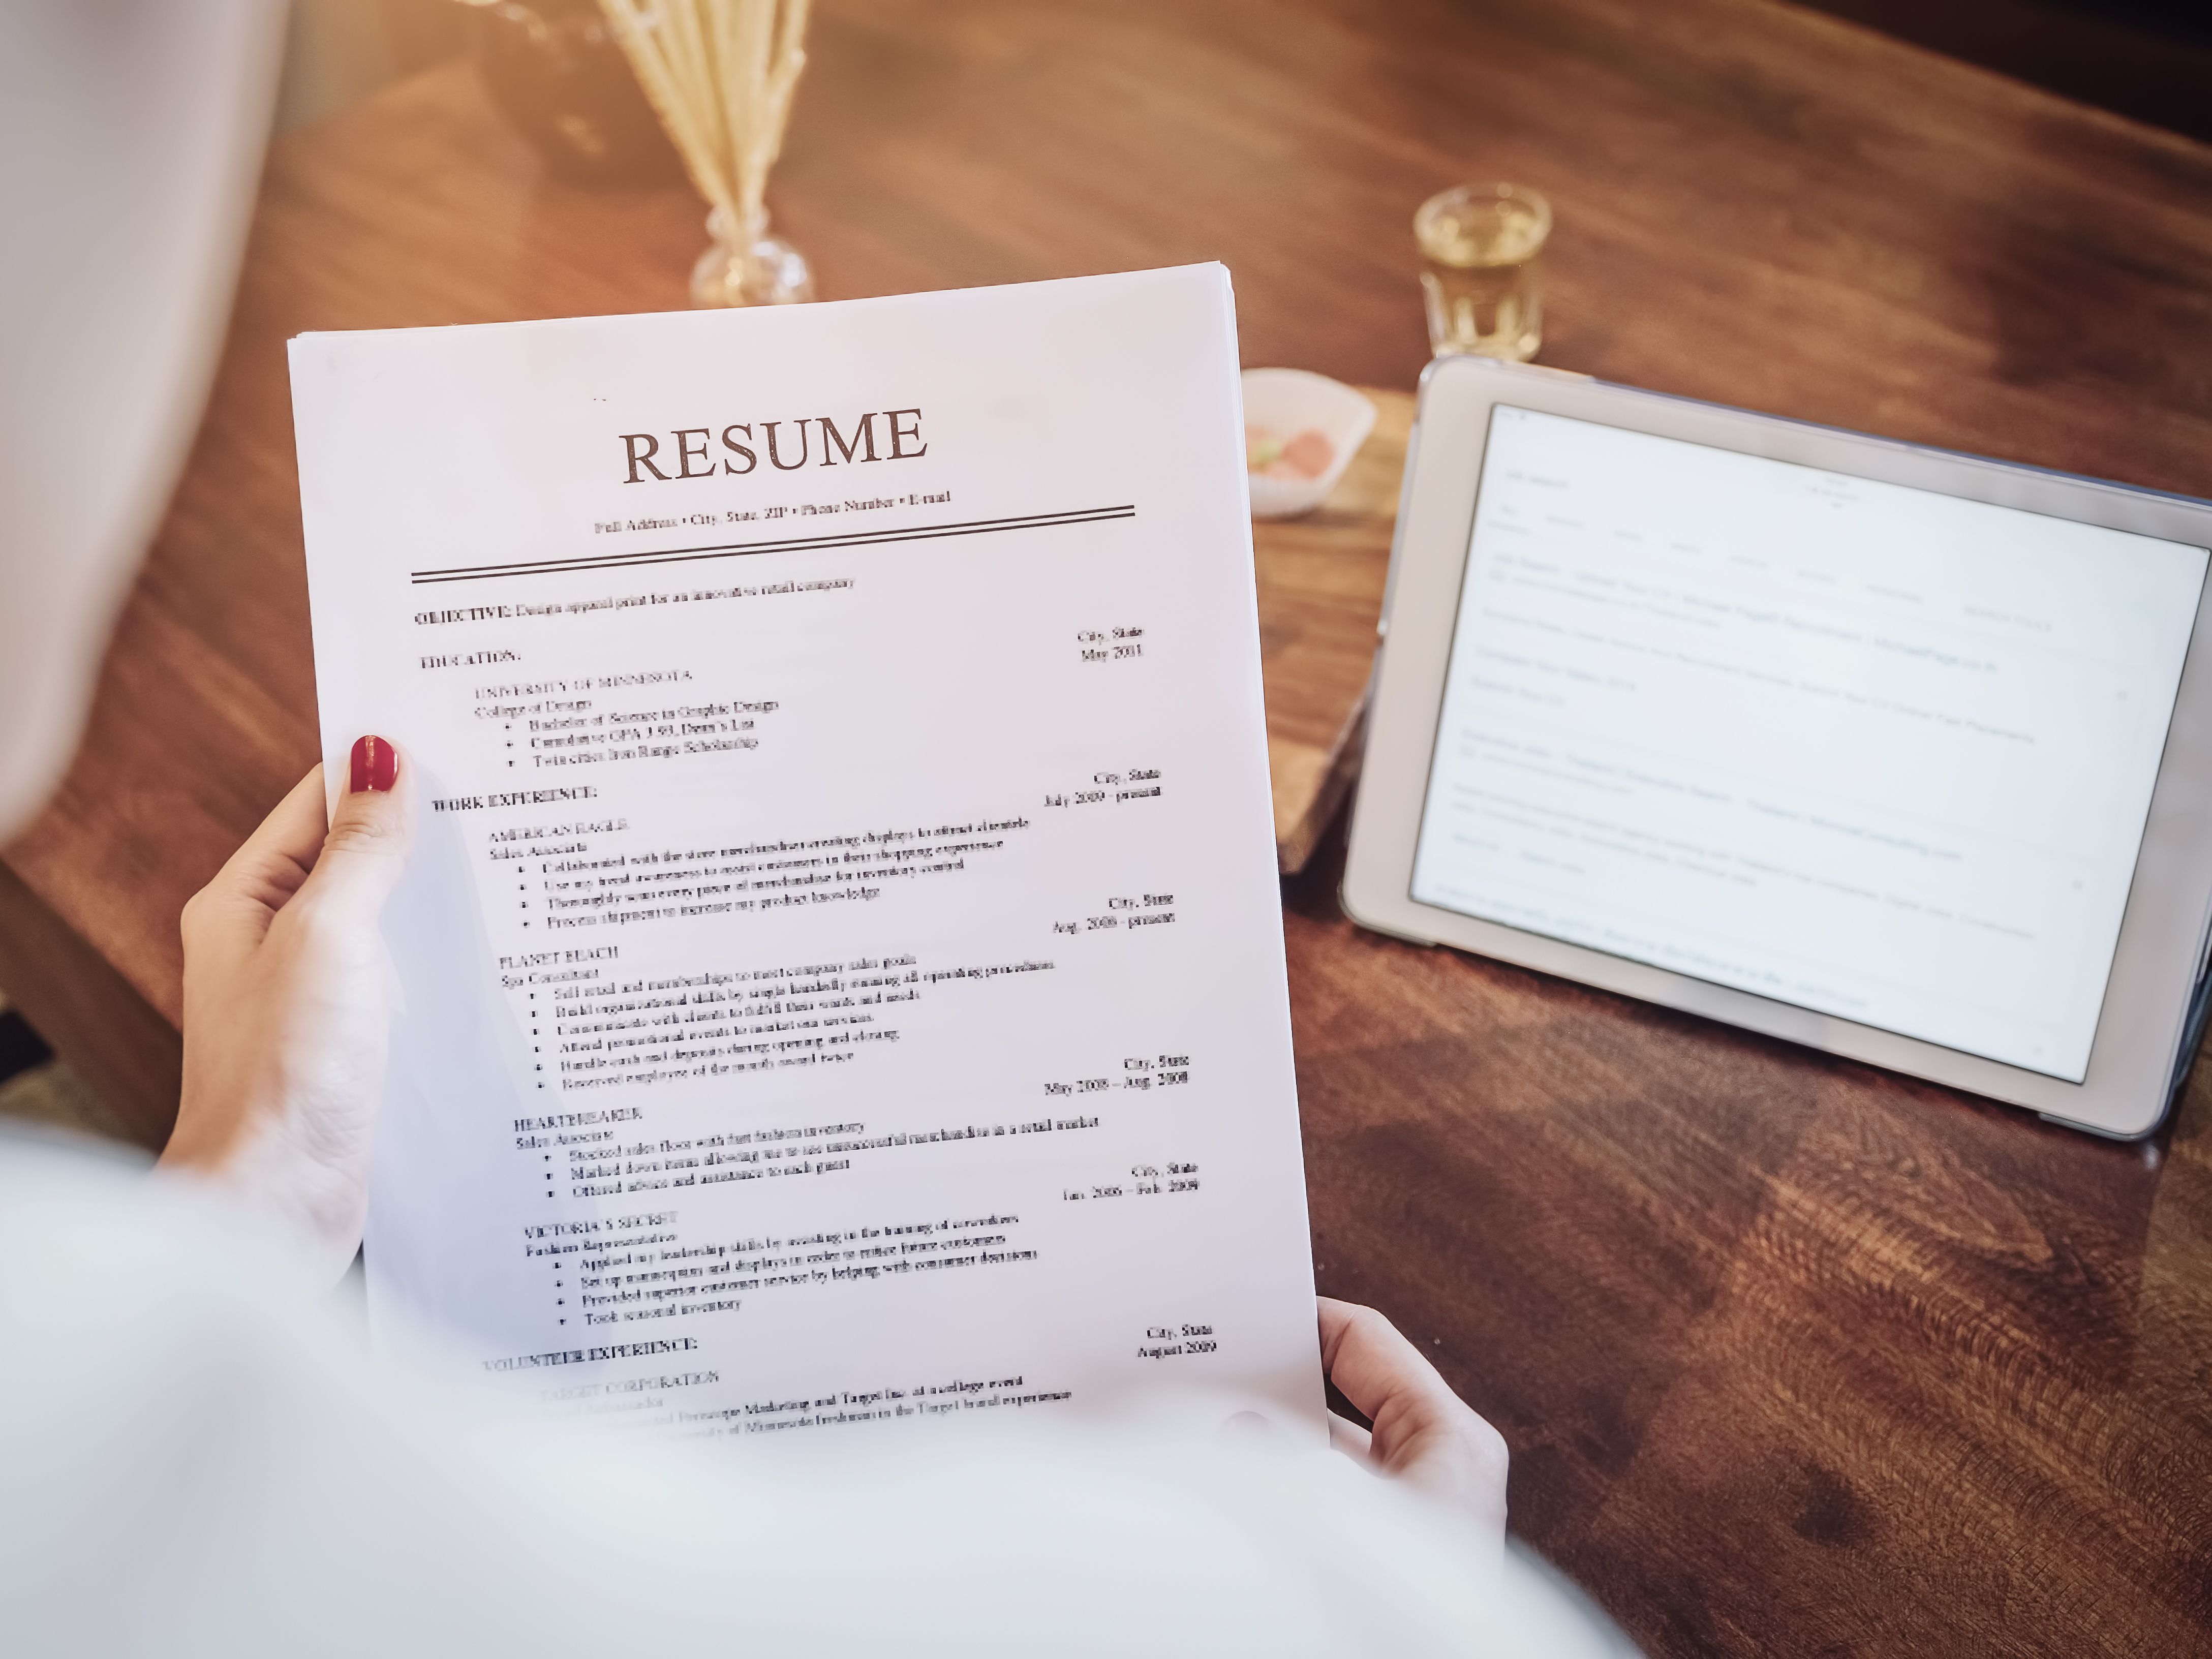 How to Use Keywords in Your Resume to Get an Interview?